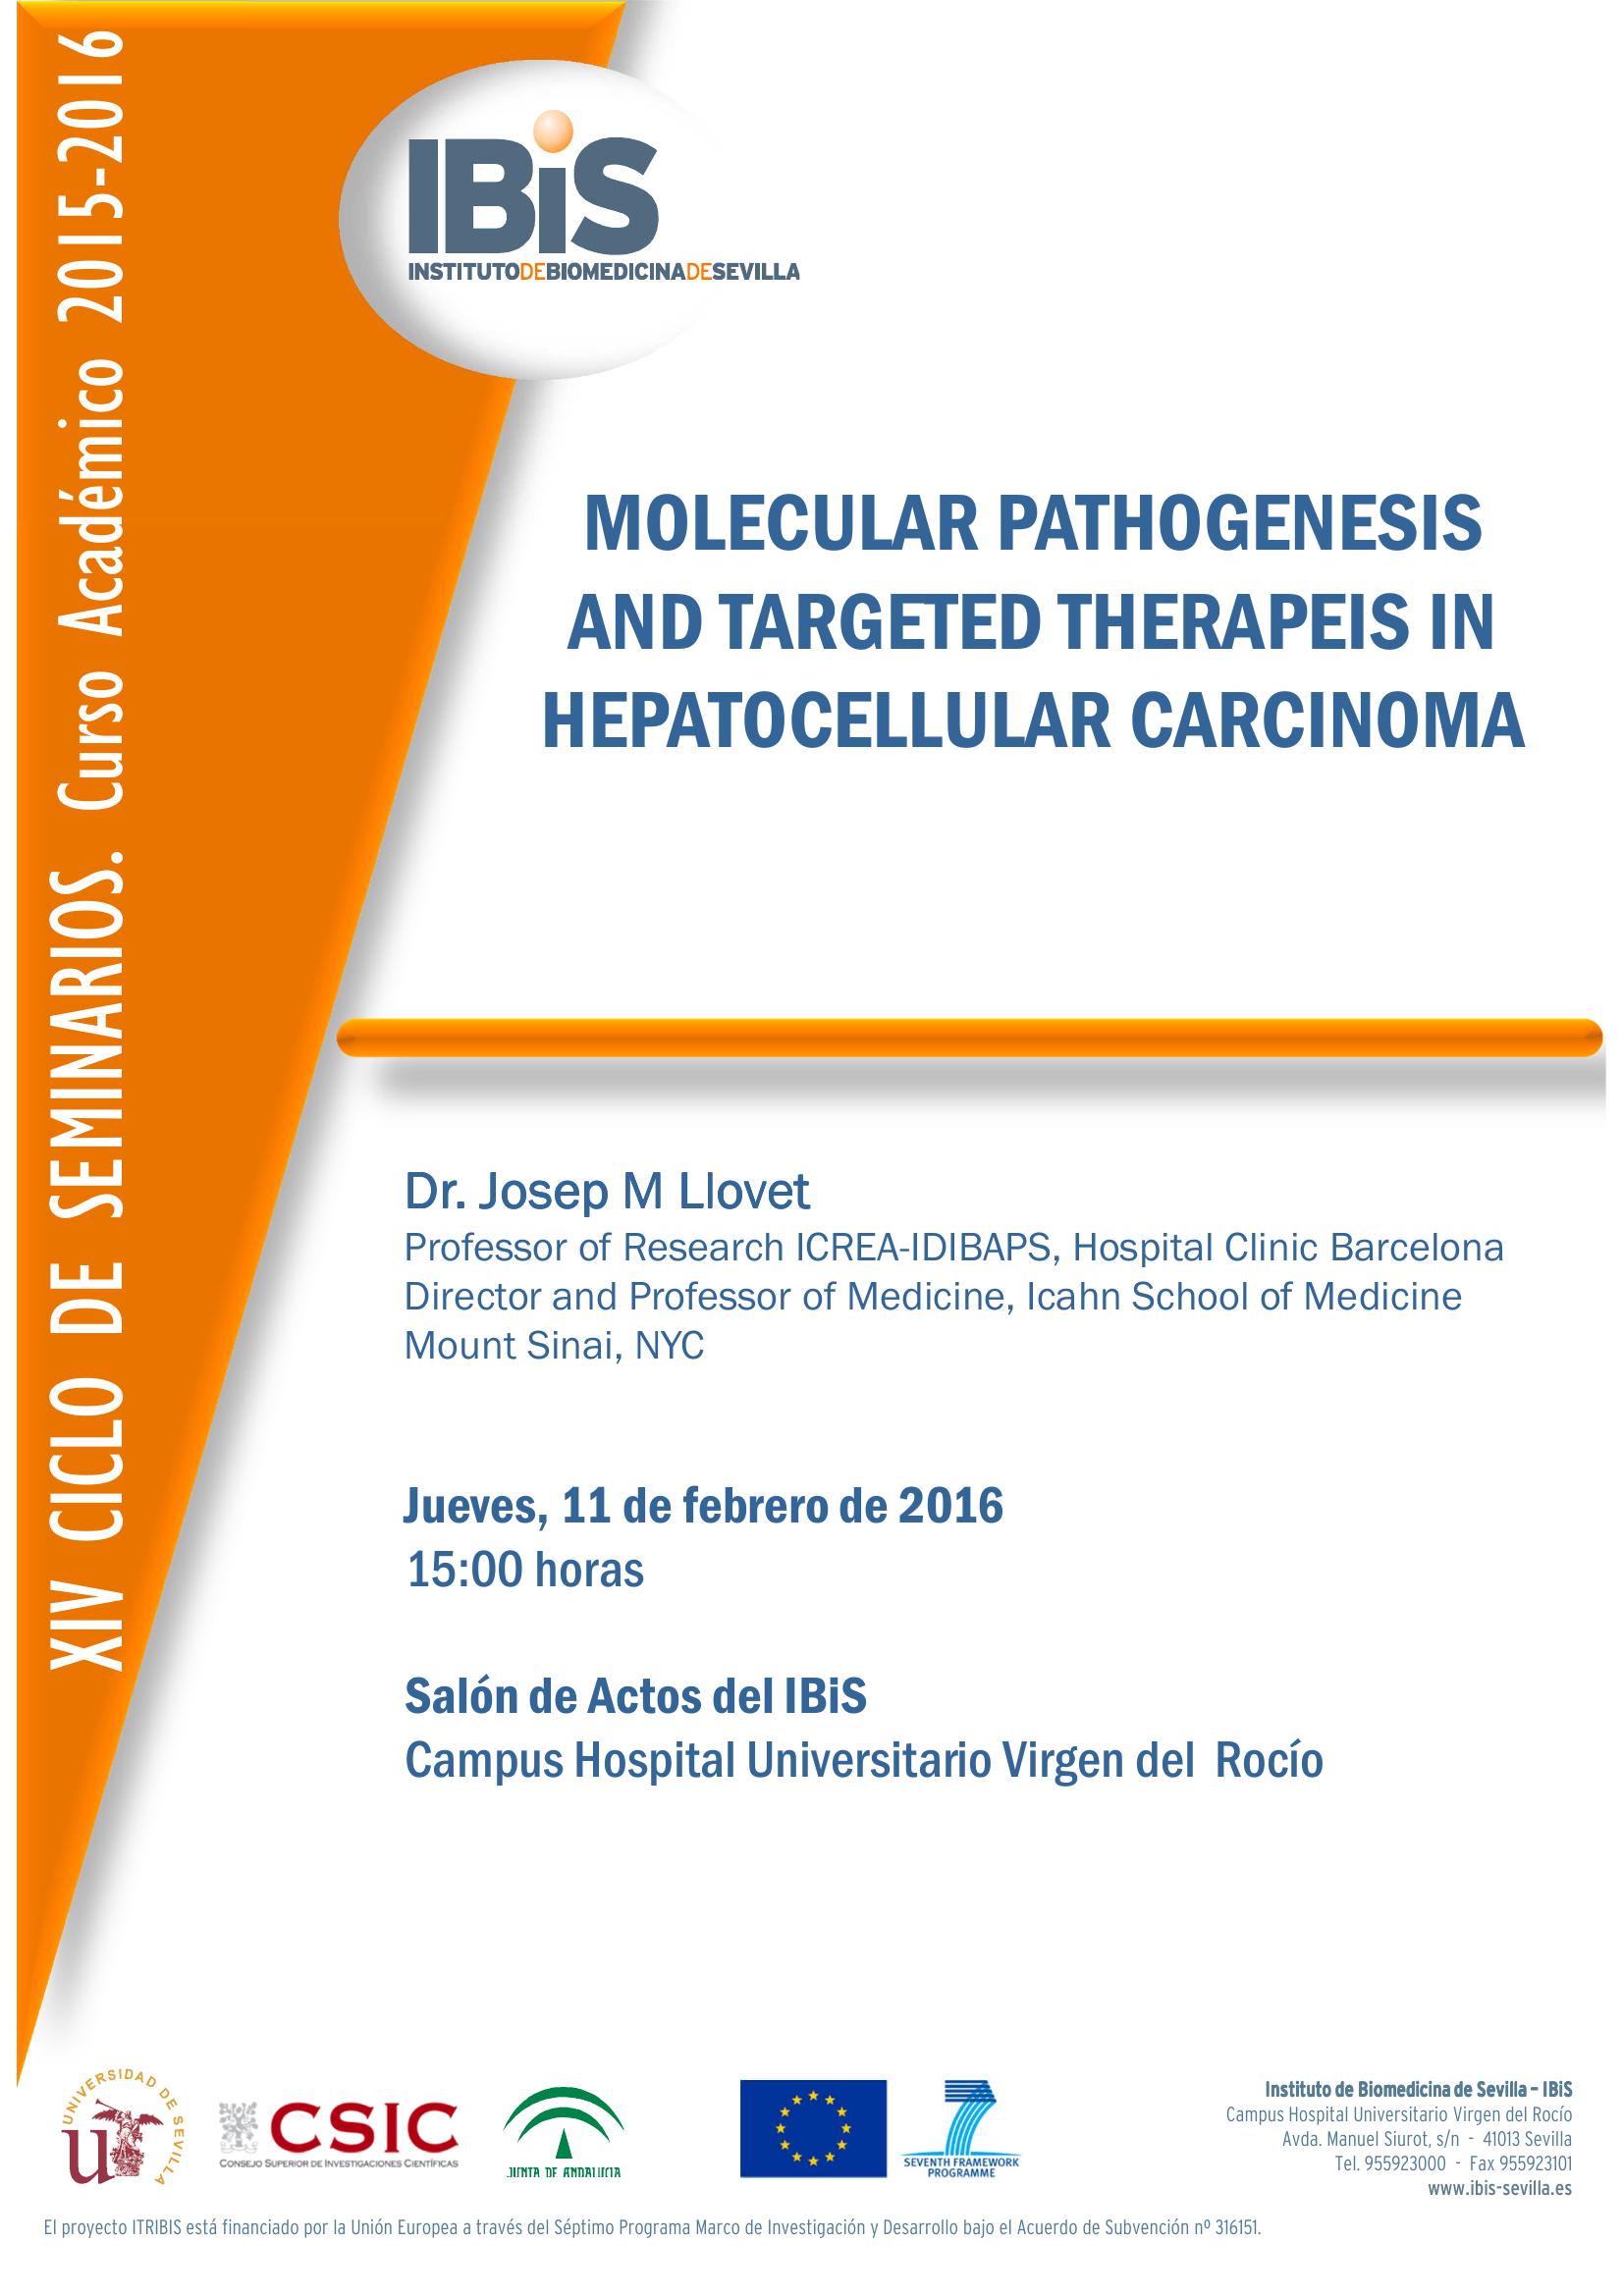 Poster: MOLECULAR PATHOGENESIS AND TARGETED THERAPEIS IN HEPATOCELLULAR CARCINOMA